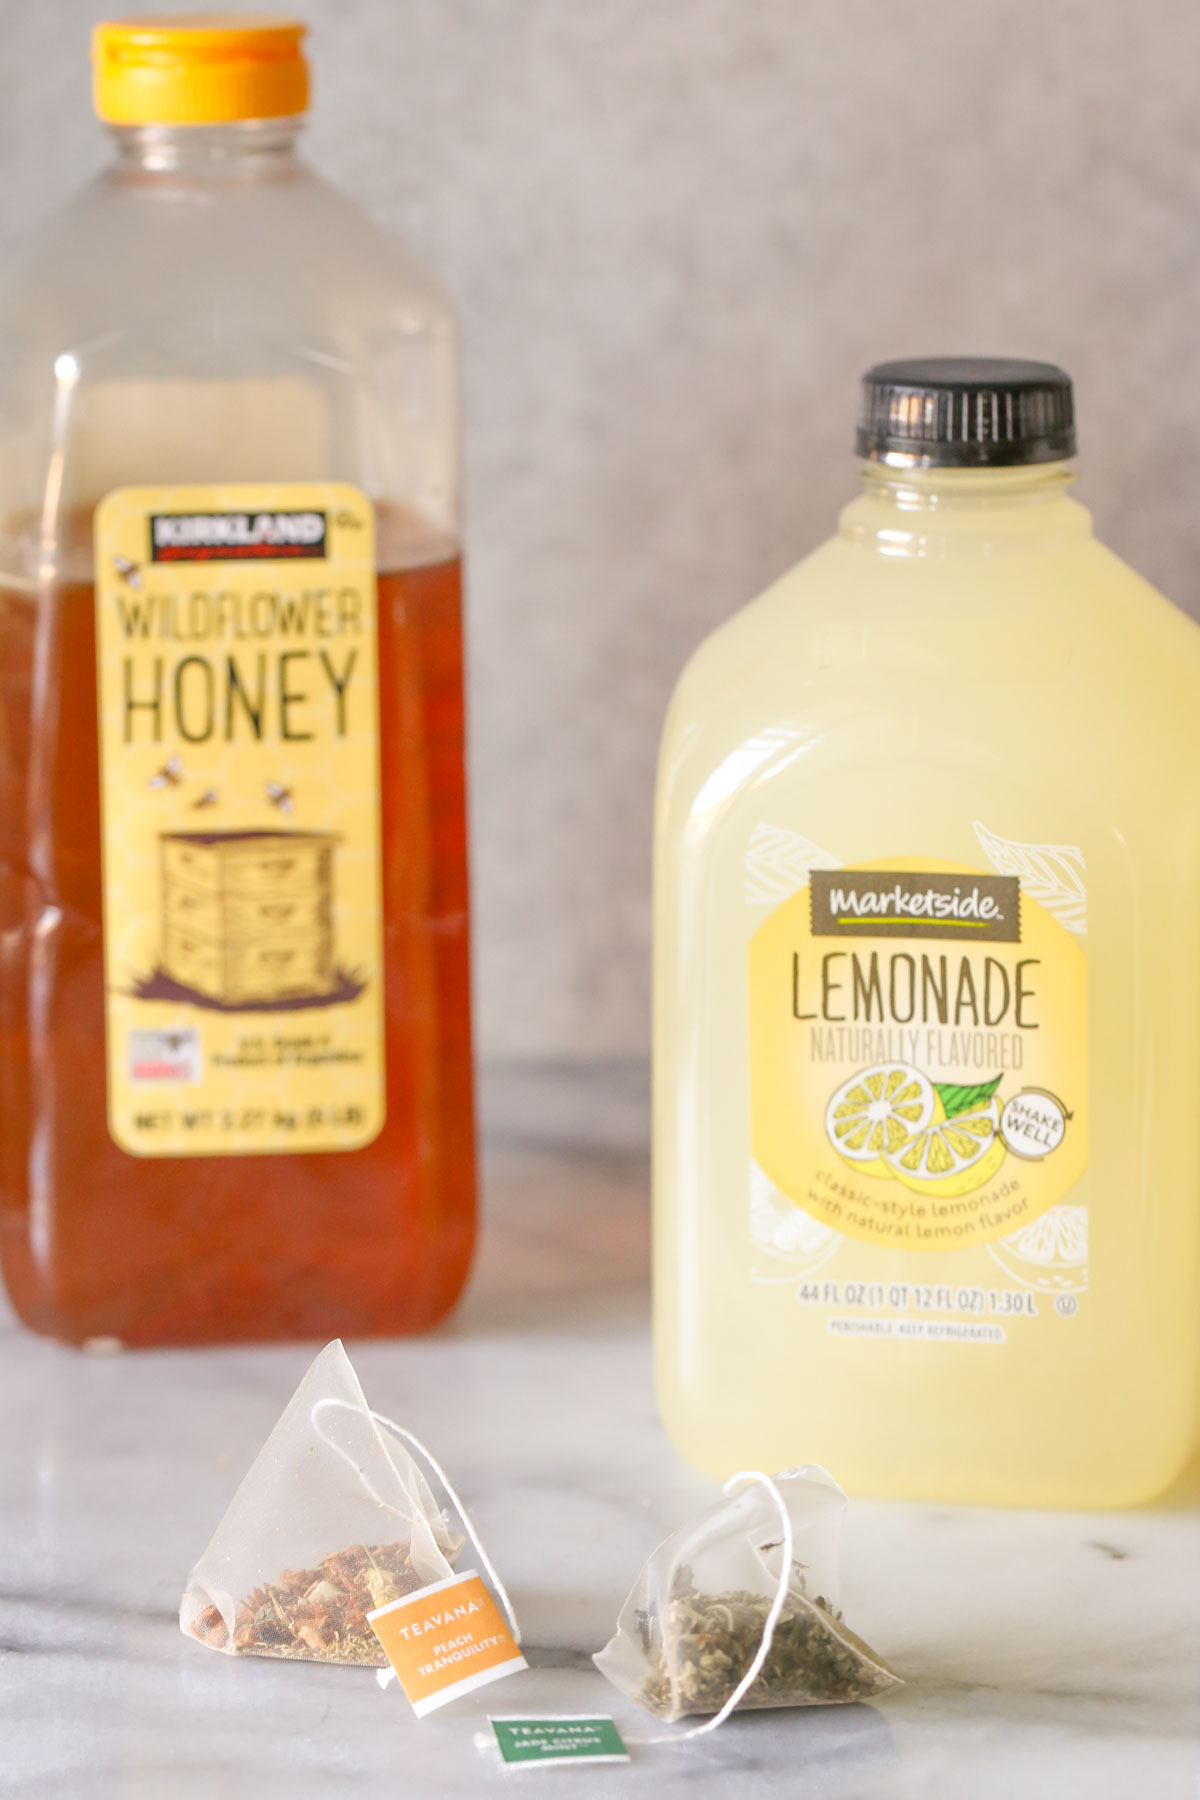 A pack of Teavana Peach Tranquility tea next to a pack of Teavana Jade Citrus Mint, with a pitcher of lemonade and a container of honey in the back, all the ingredients for the Starbucks Medicine Ball Tea.